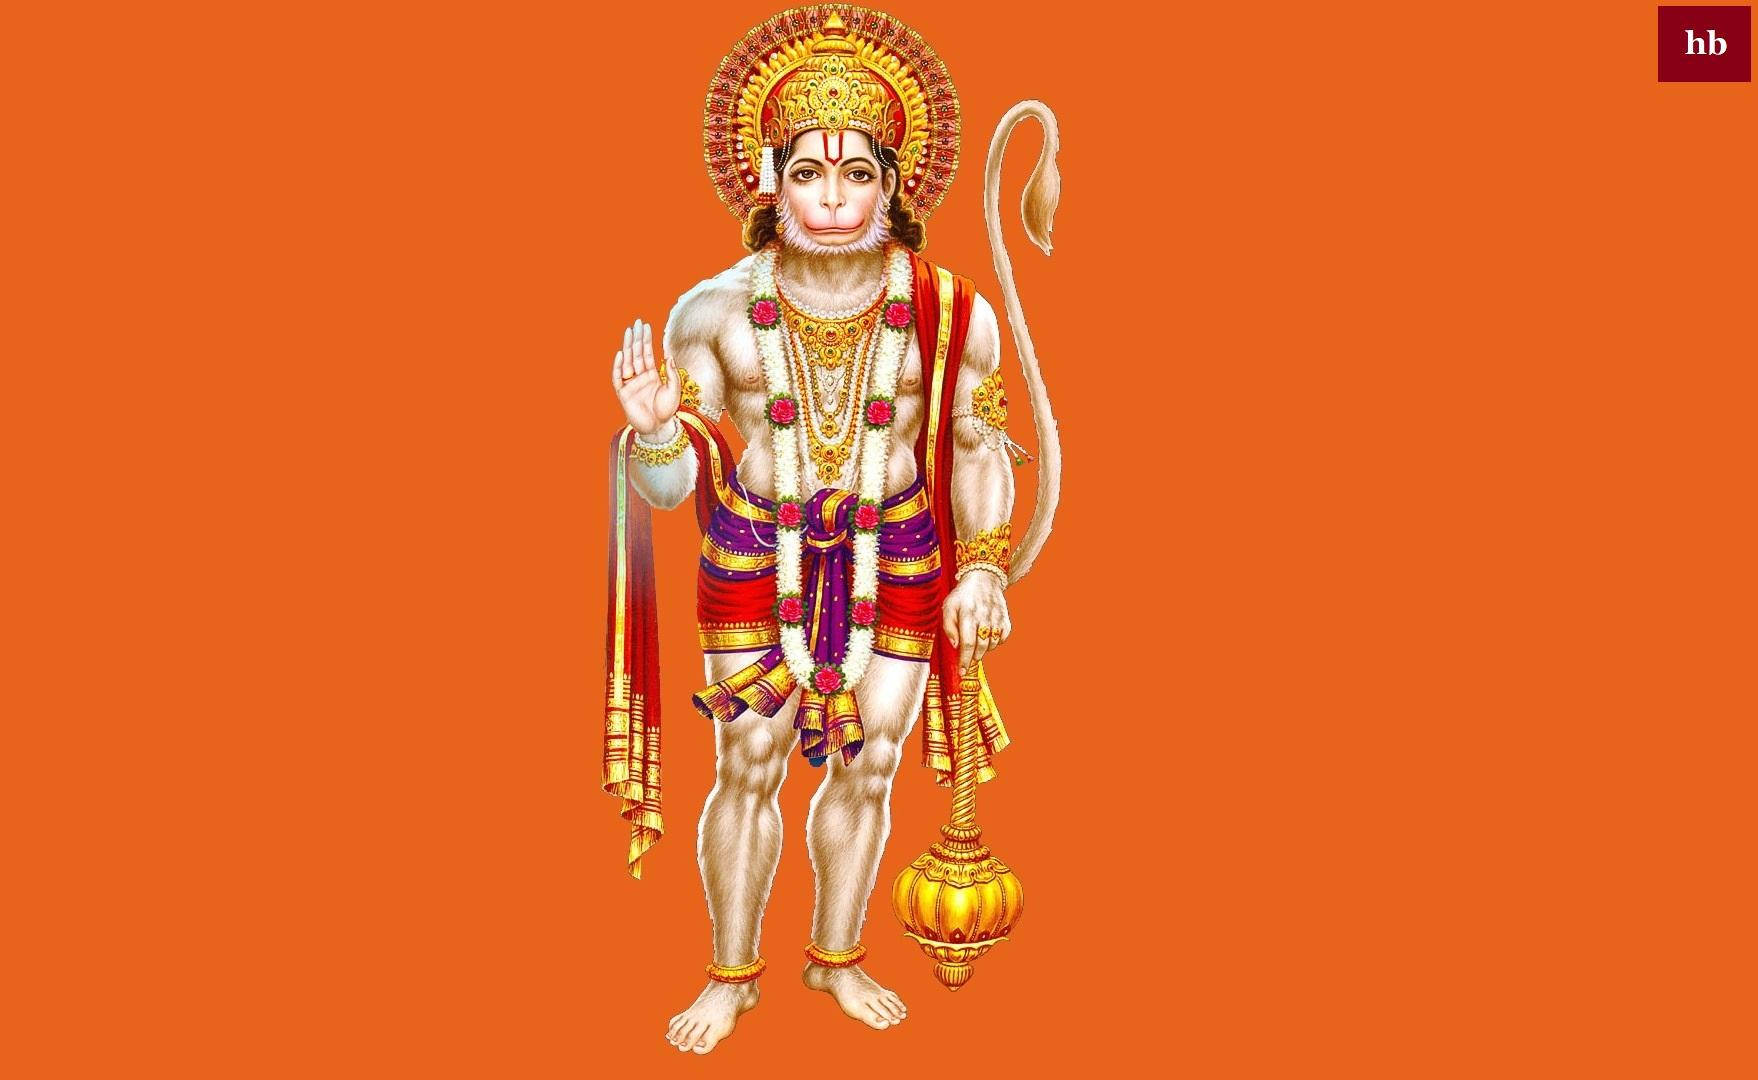 100+] Lord Hanuman Hd Wallpapers for FREE | Wallpapers.com